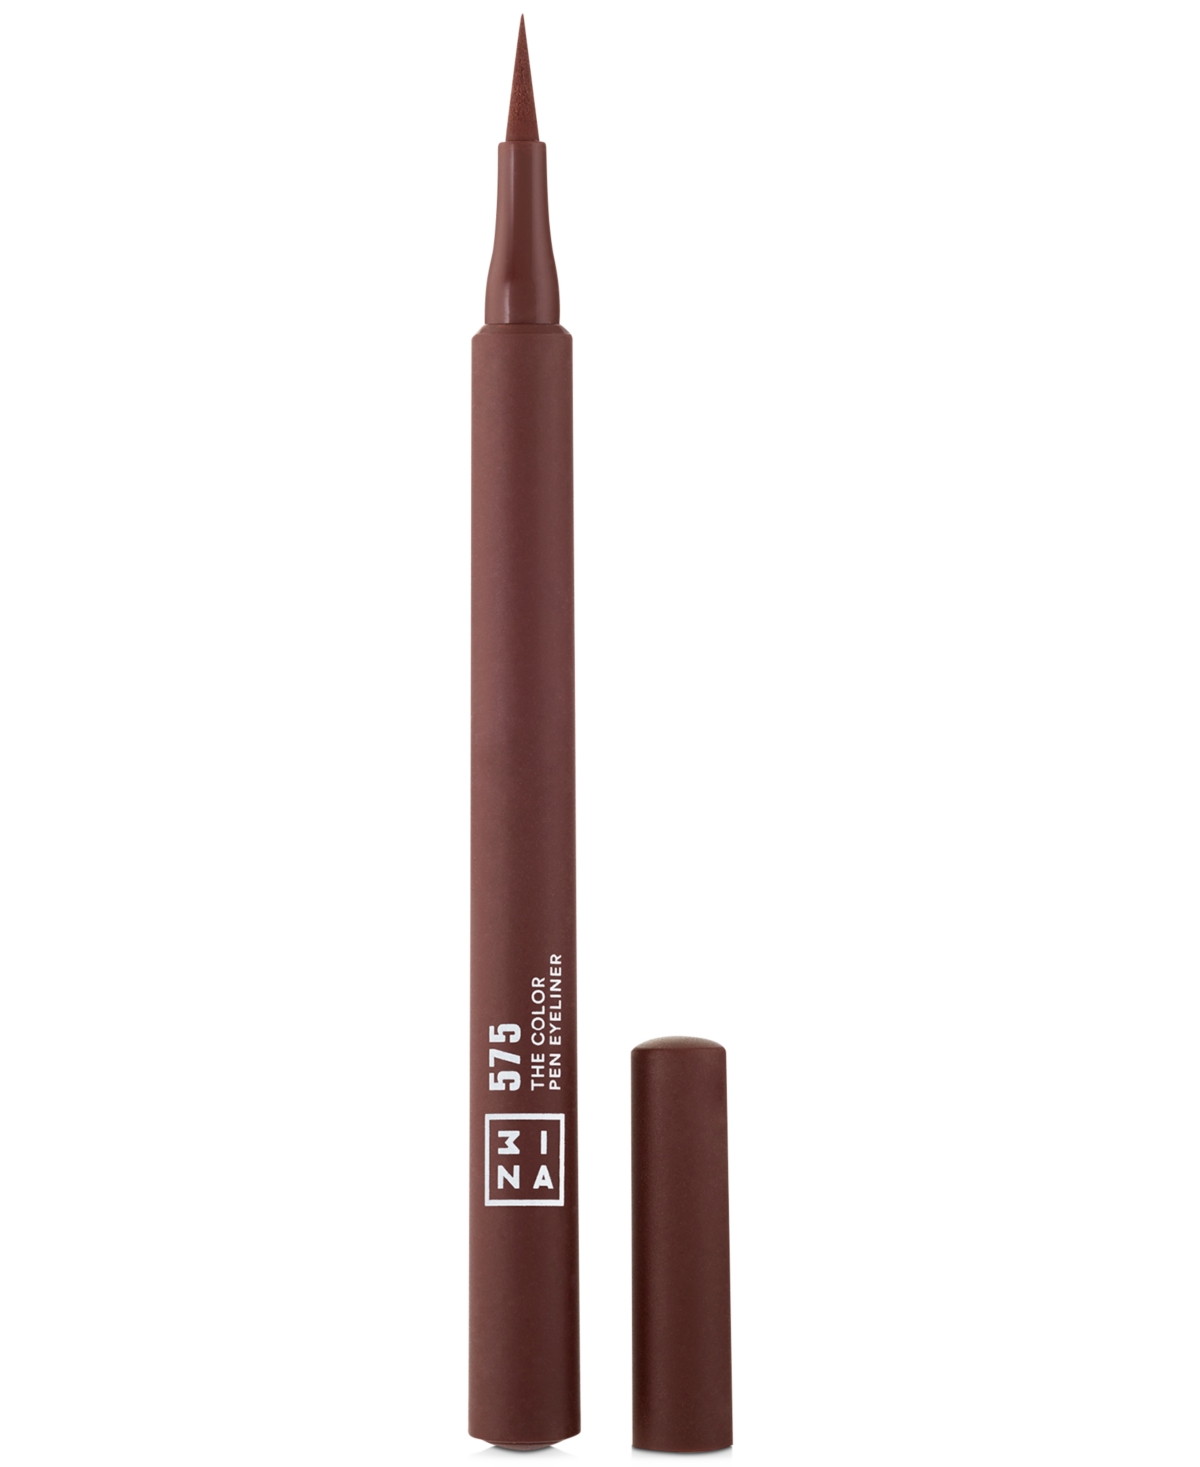 3ina The Color Pen Eyeliner In - Brown